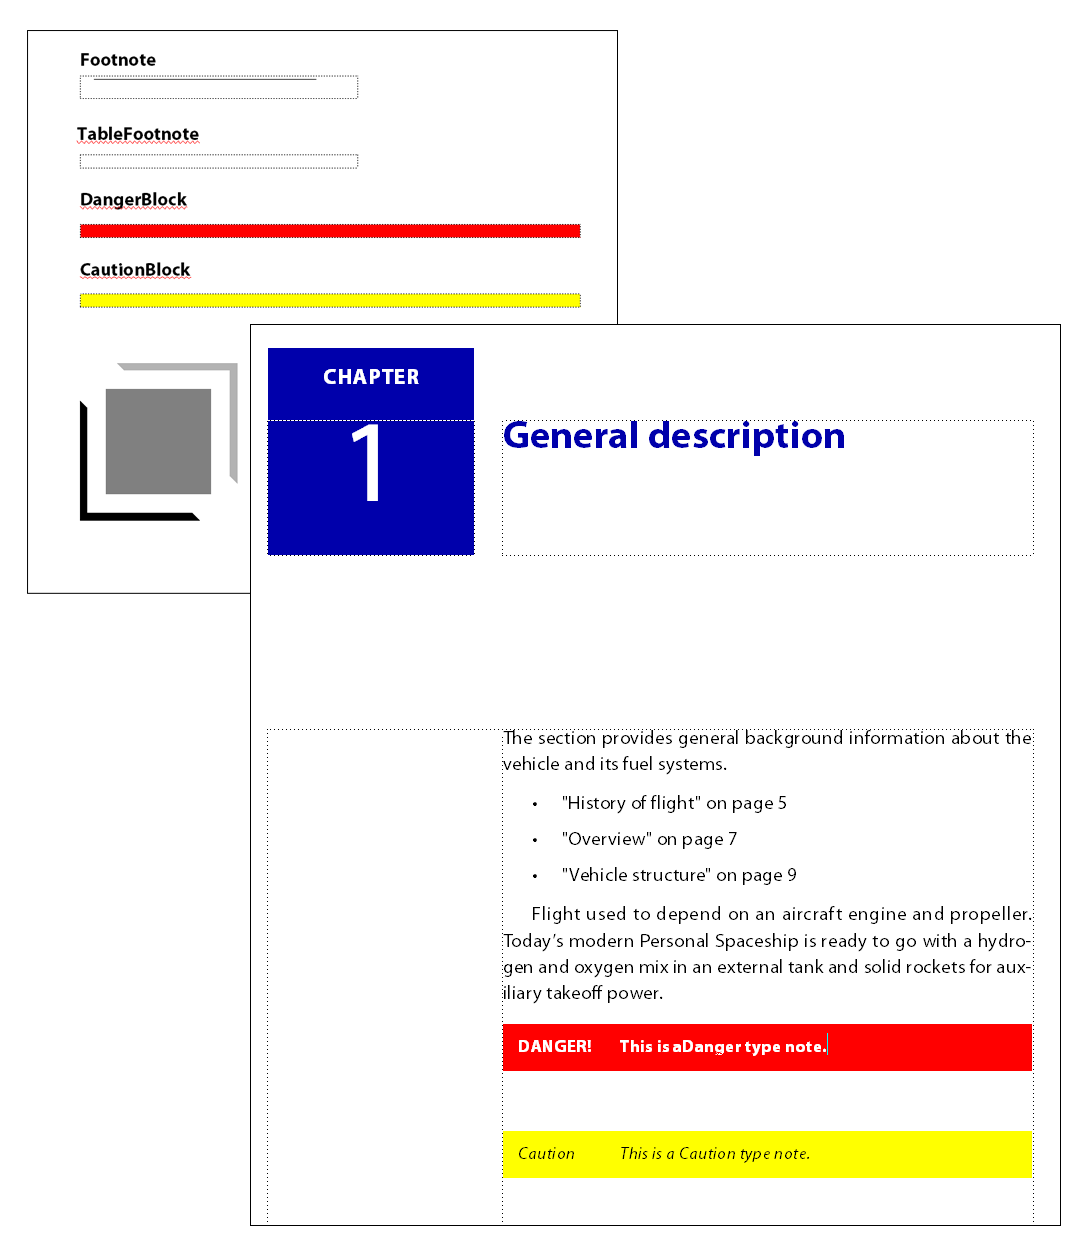 Referencepage stores frequently used graphics that you can position consistentlythroughout a document